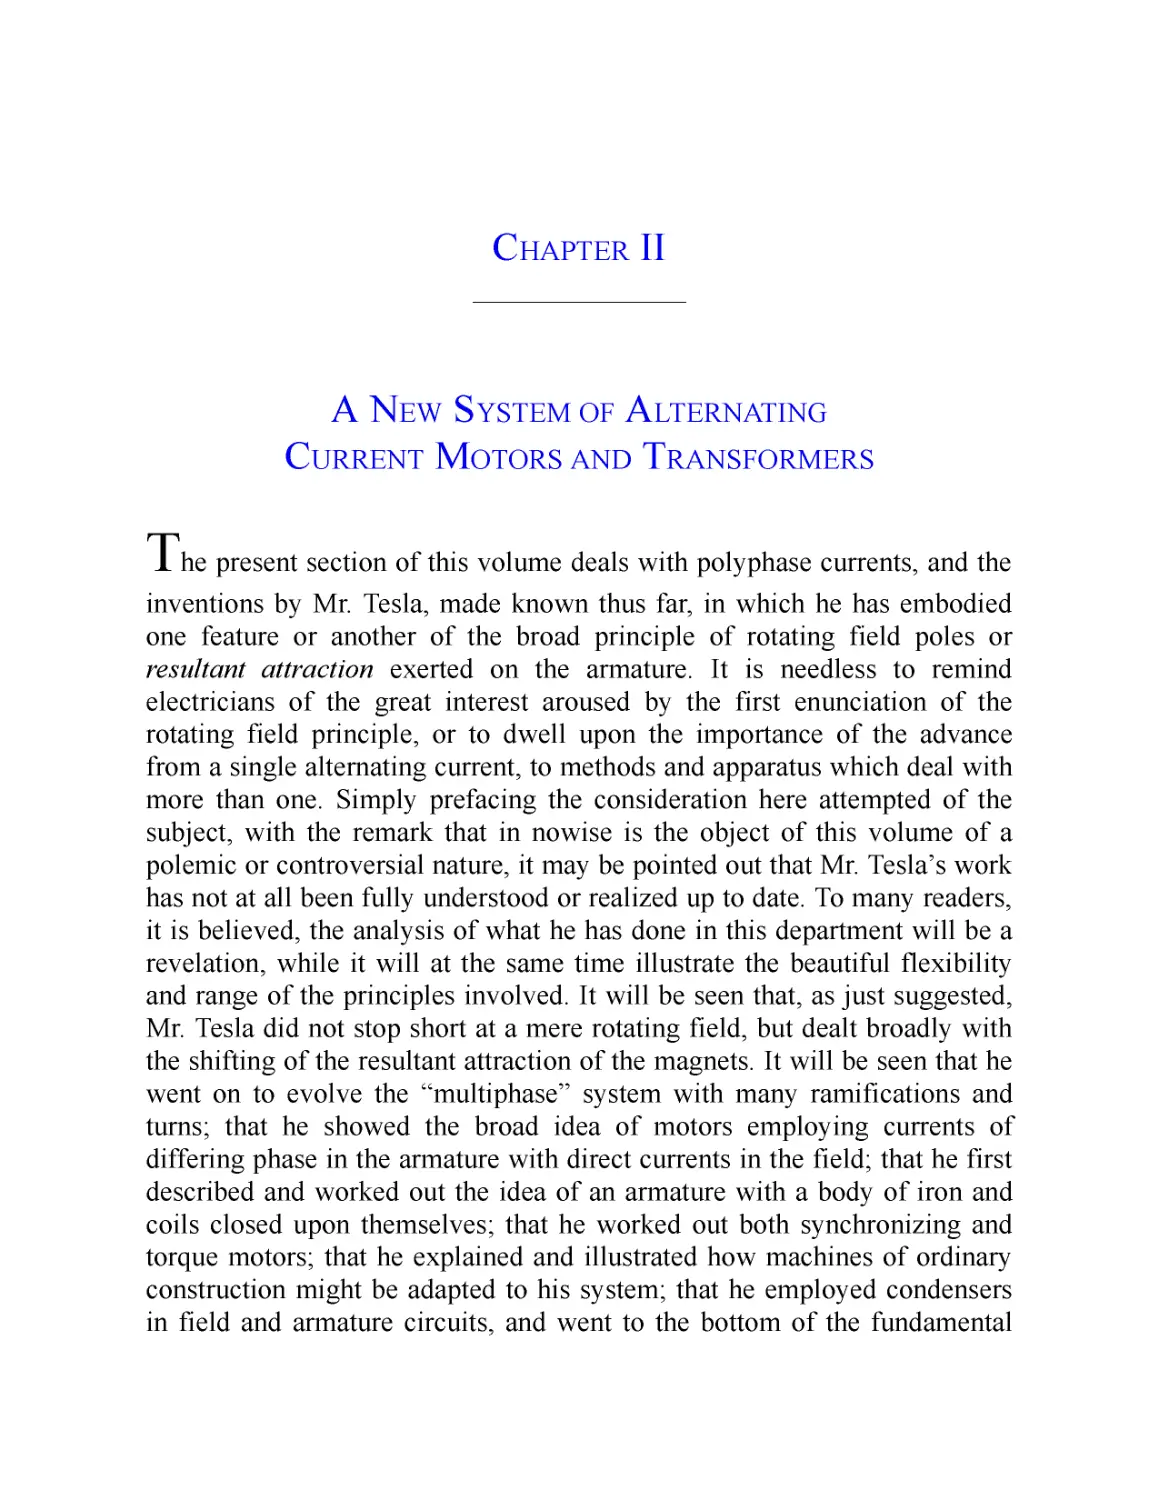 ﻿Chapter II: A New System of Alternating Current Motors and Transformer